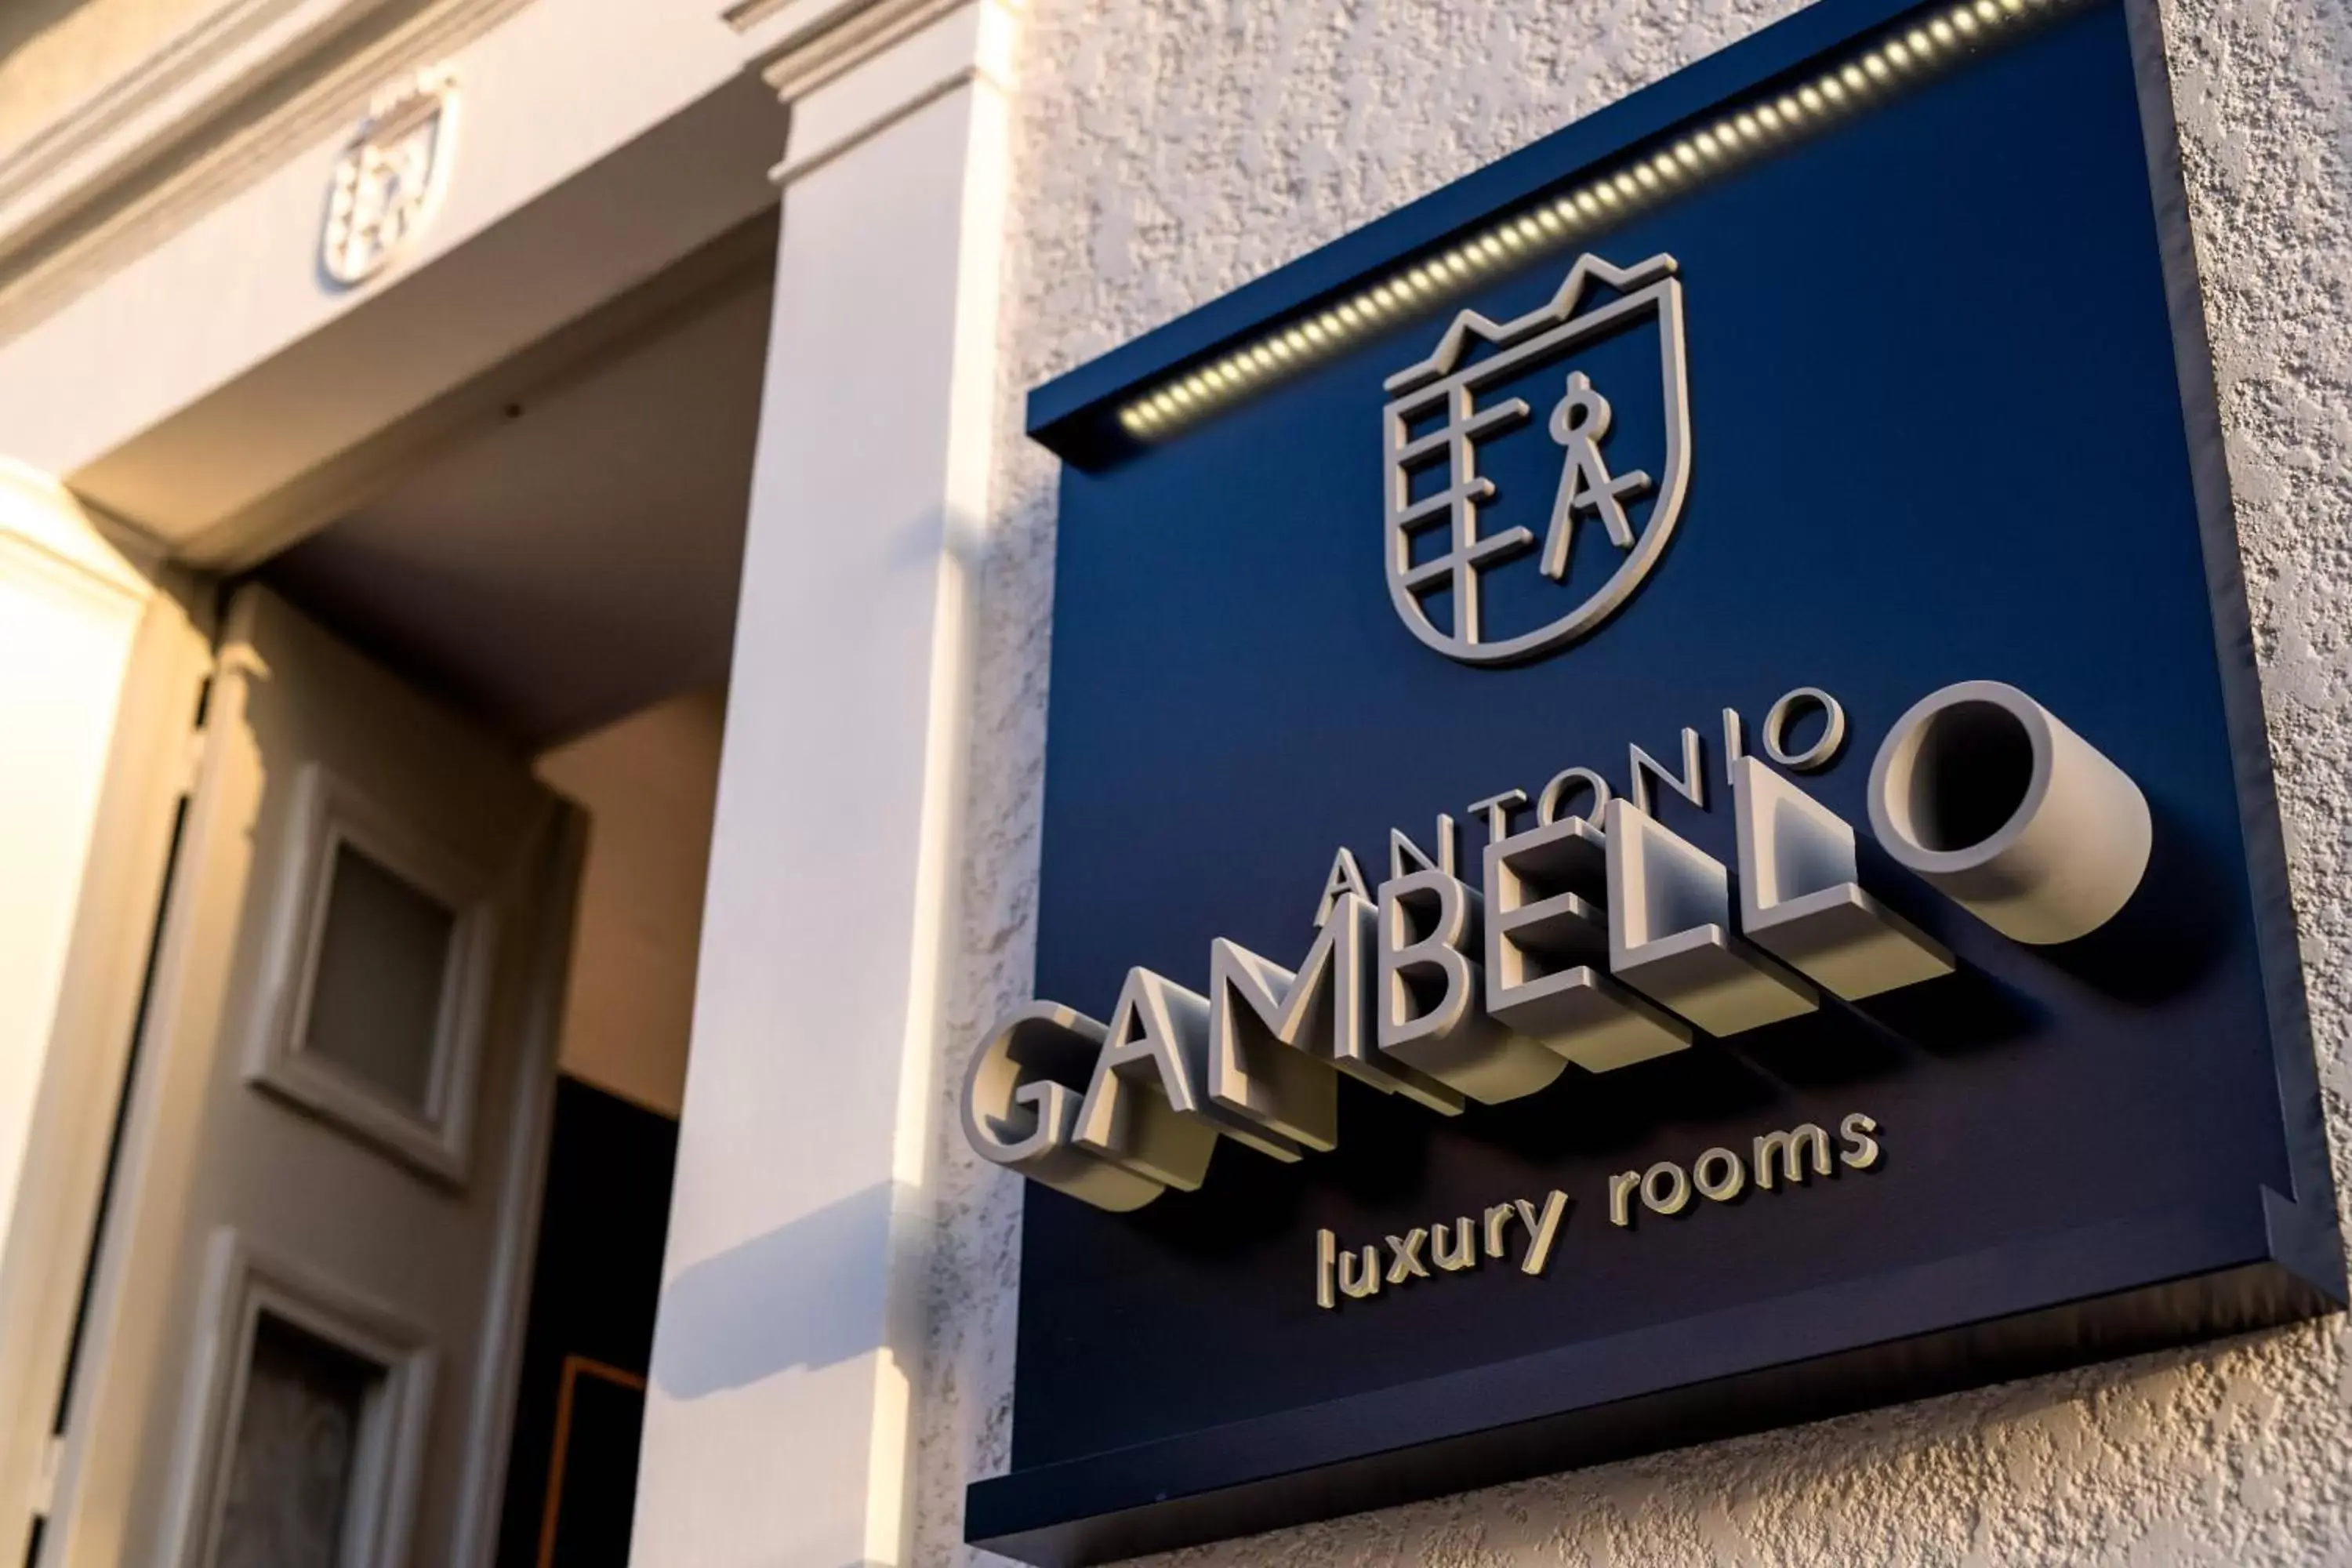 Property logo or sign in Gambello Luxury Rooms